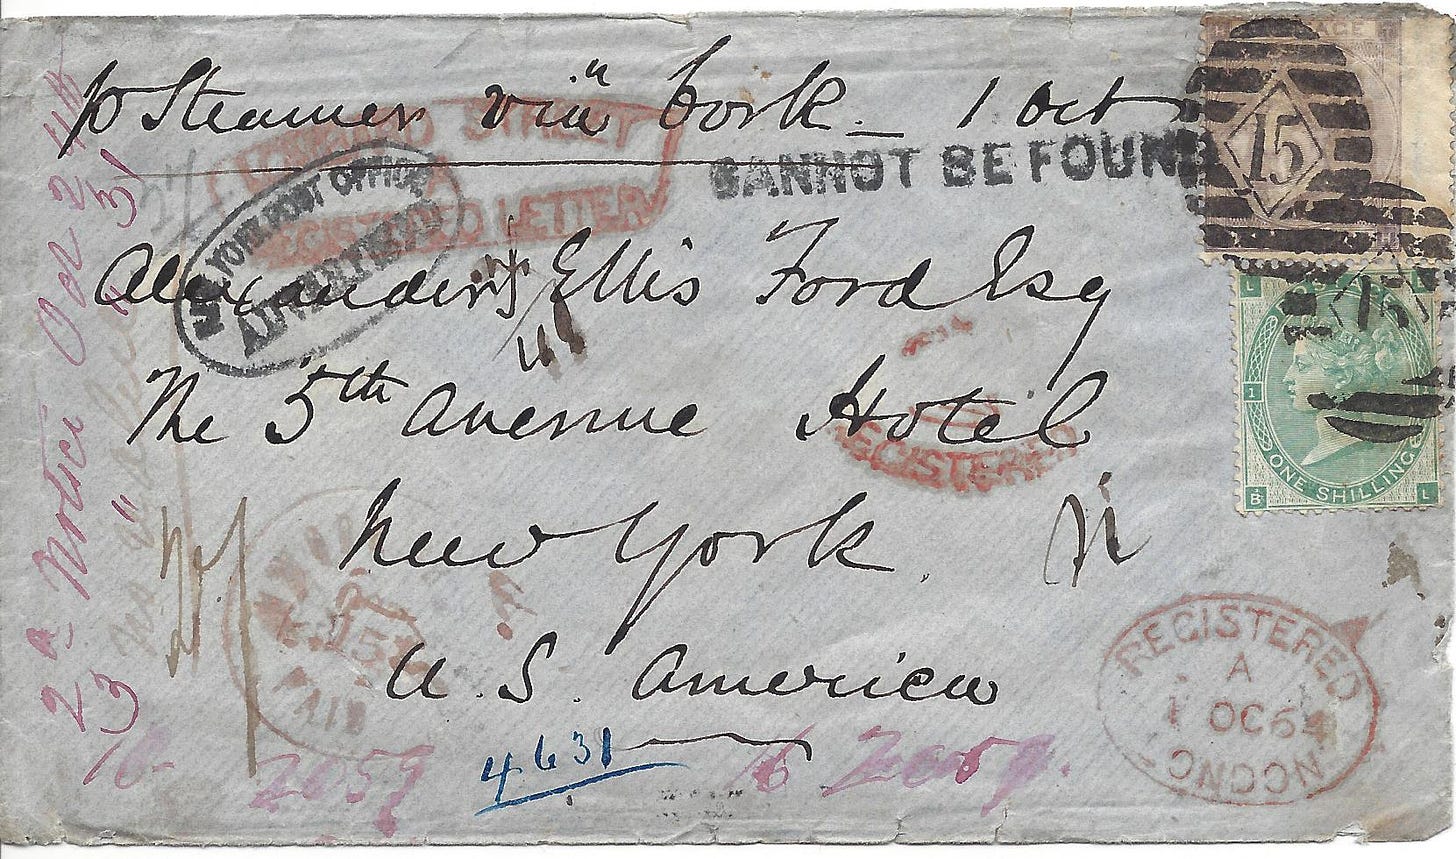 1864 letter mailed from the United Kingdom to the United States